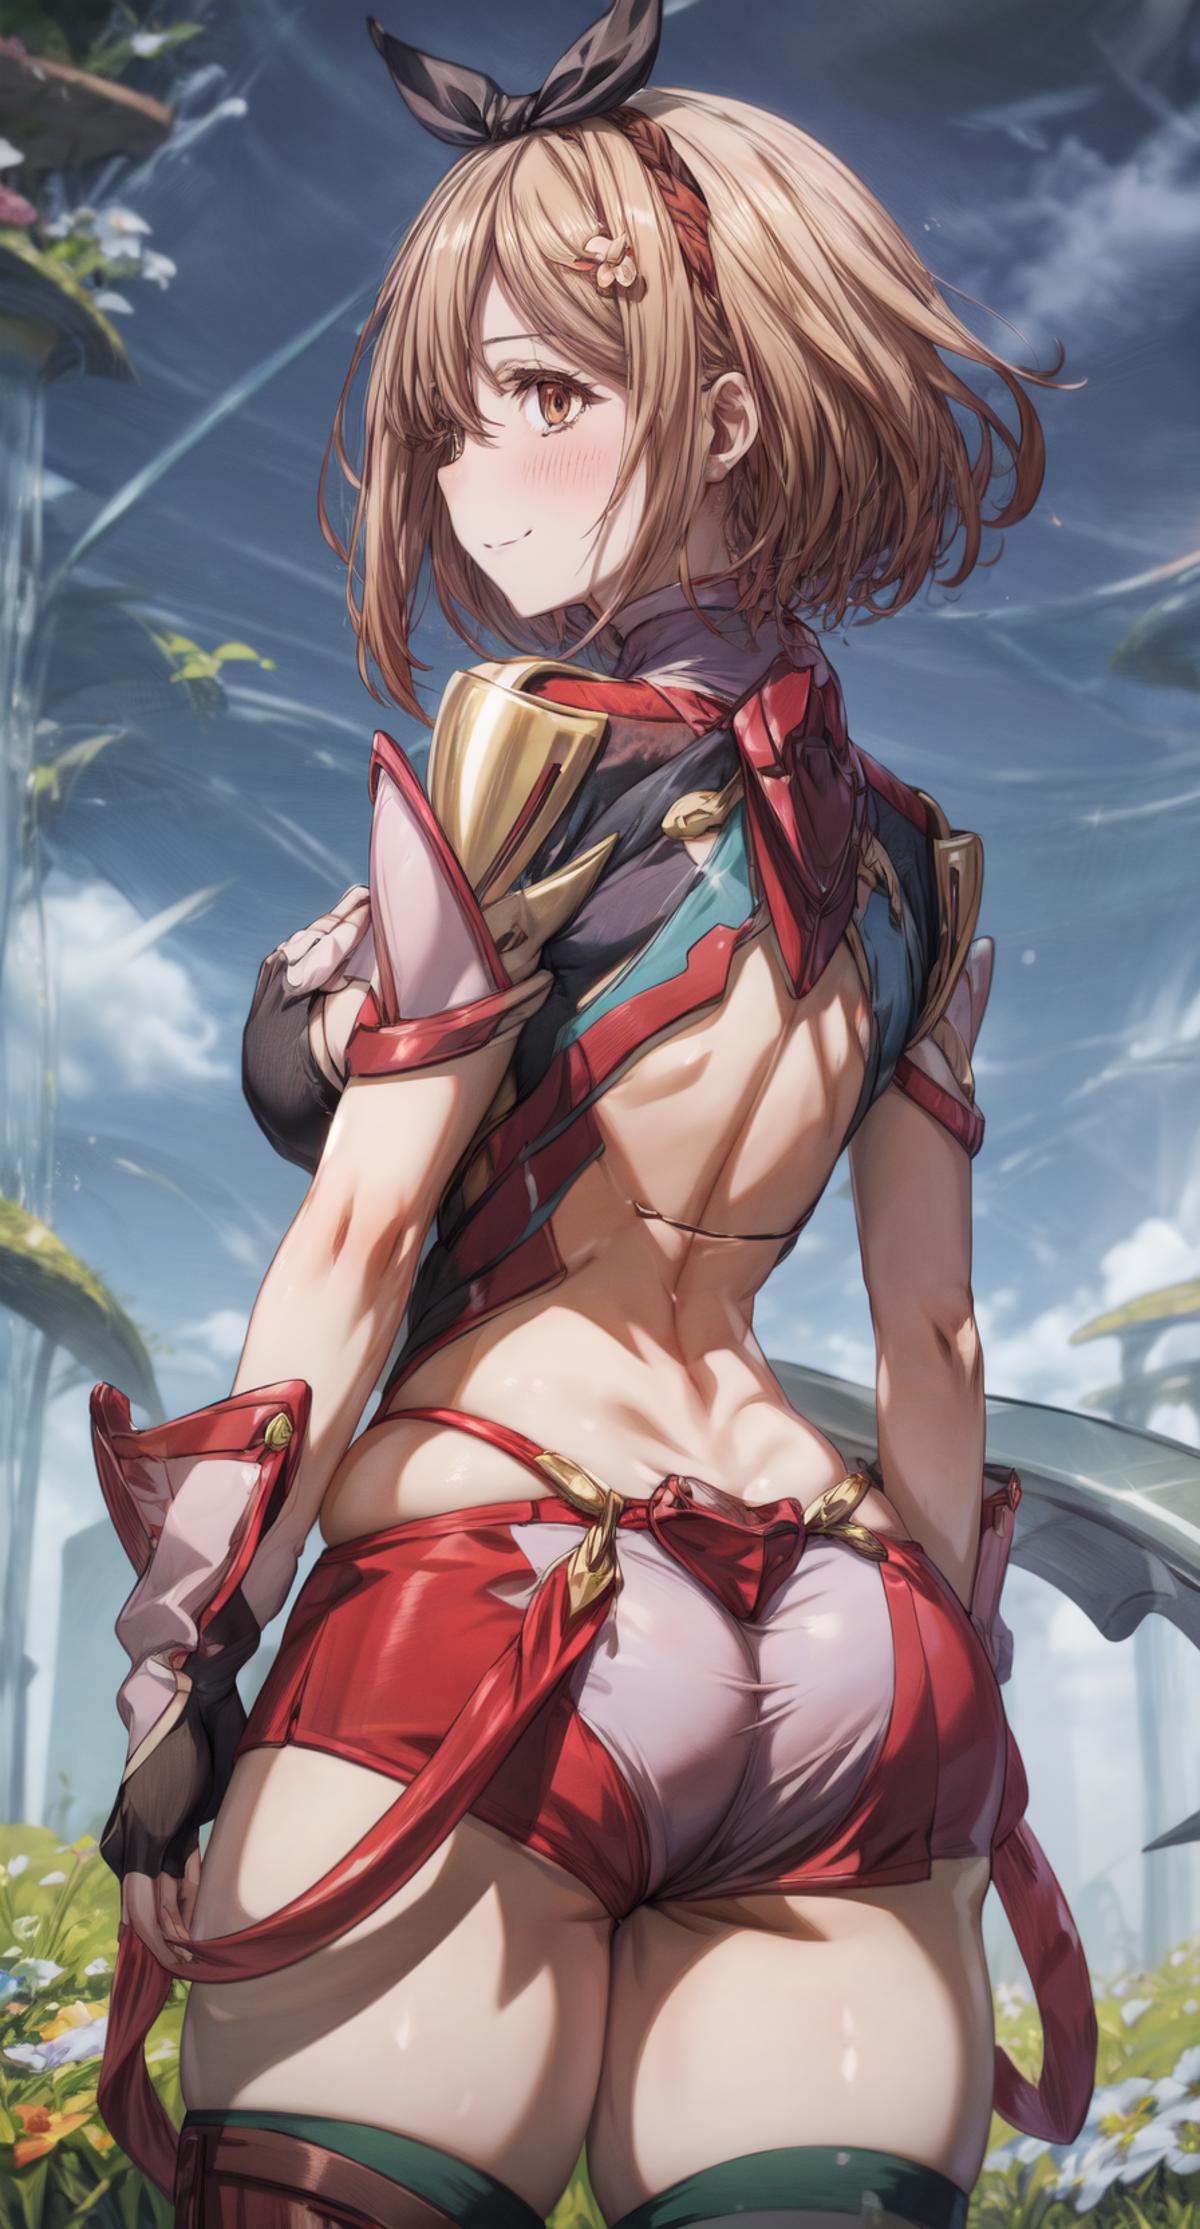 Pyra (Outfit and Character) image by Foxtrott